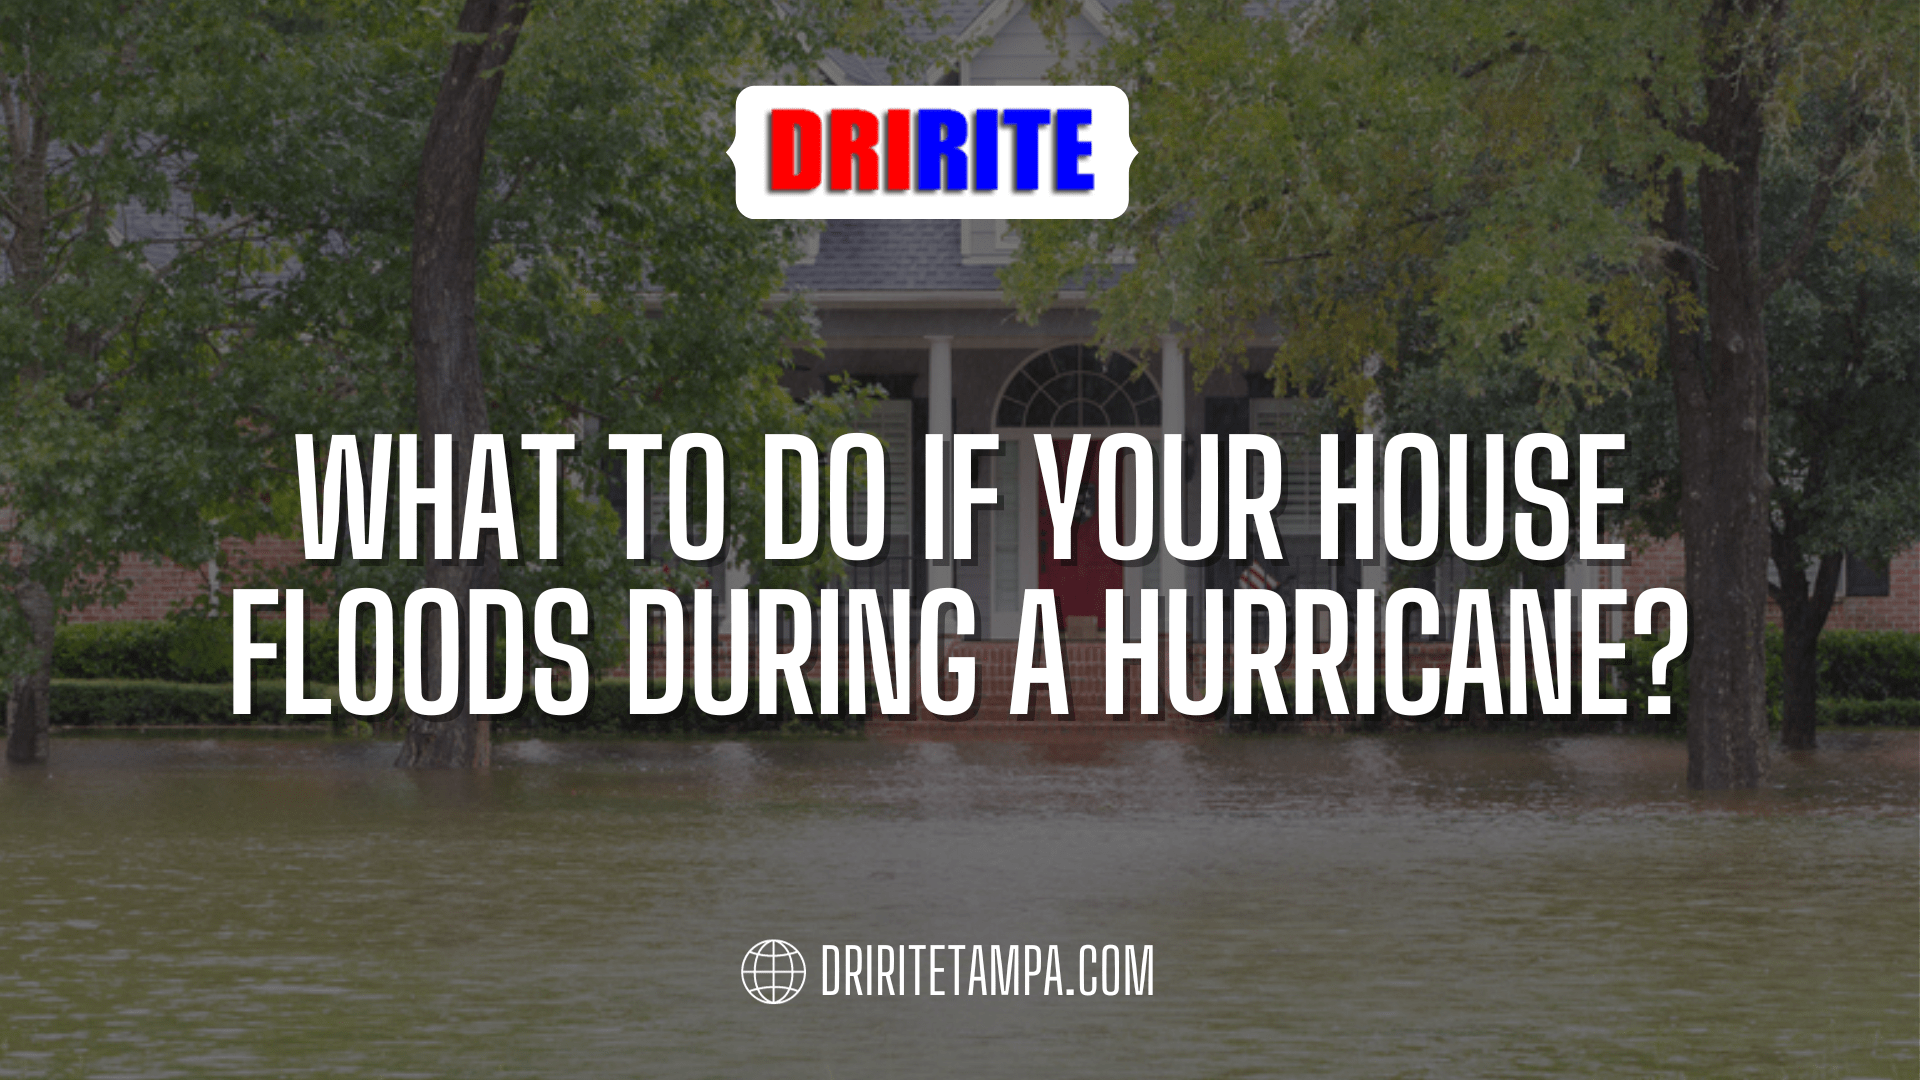 What to Do If Your House Floods During a Hurricane